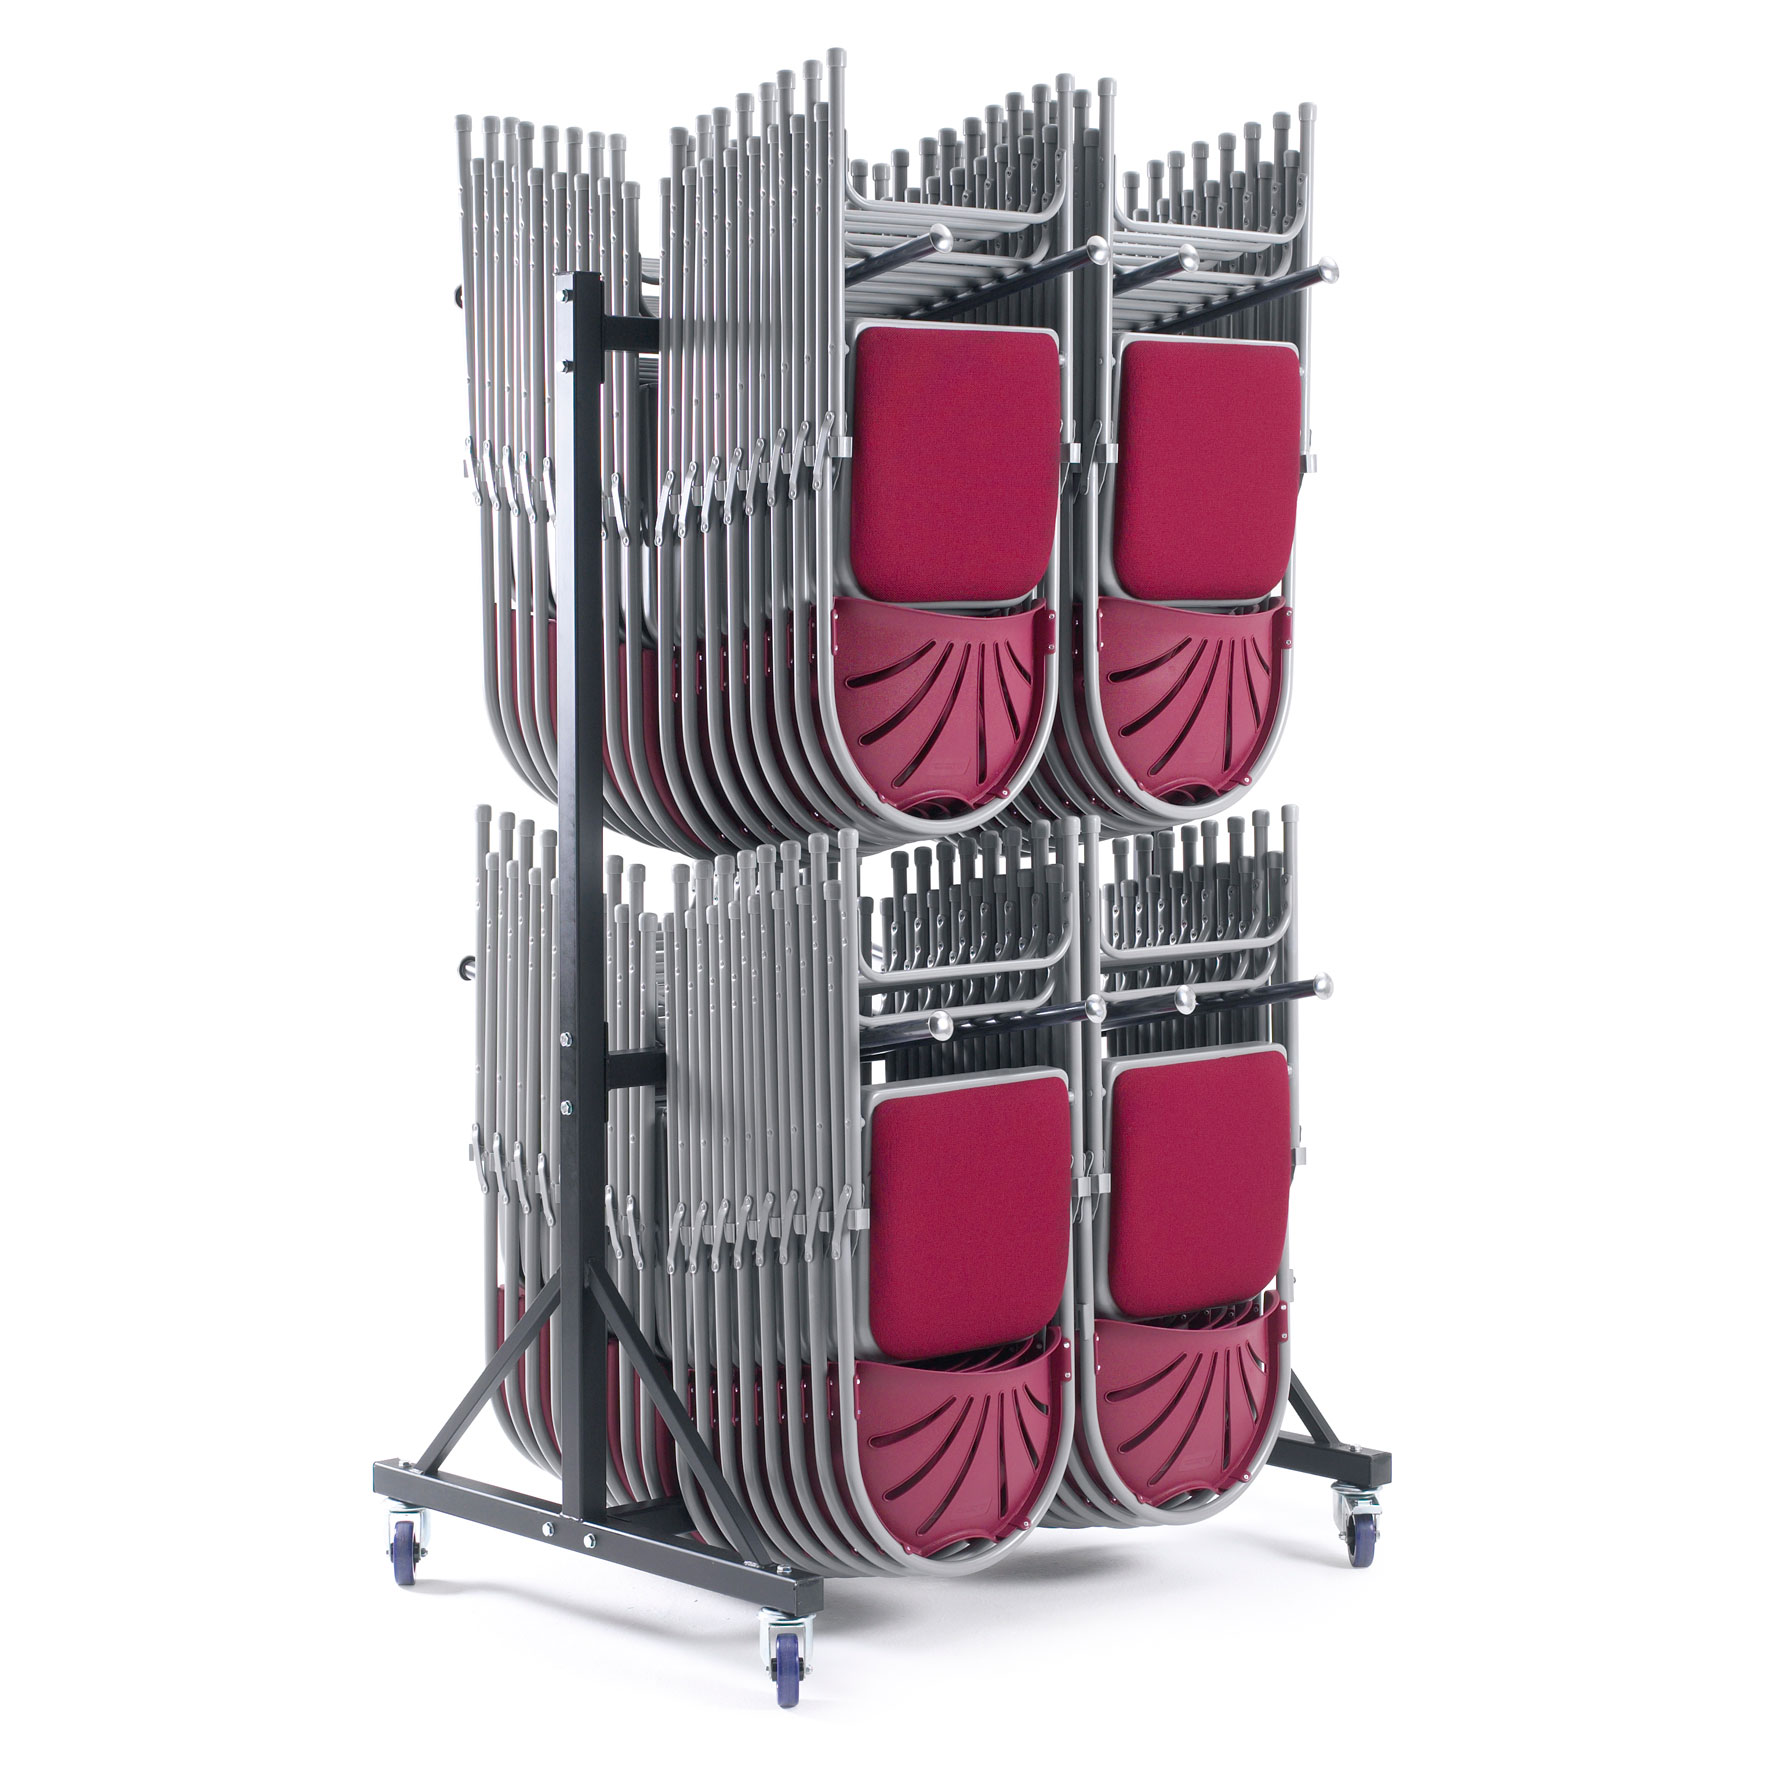 High Hanging Chair Trolley - 2 Rows